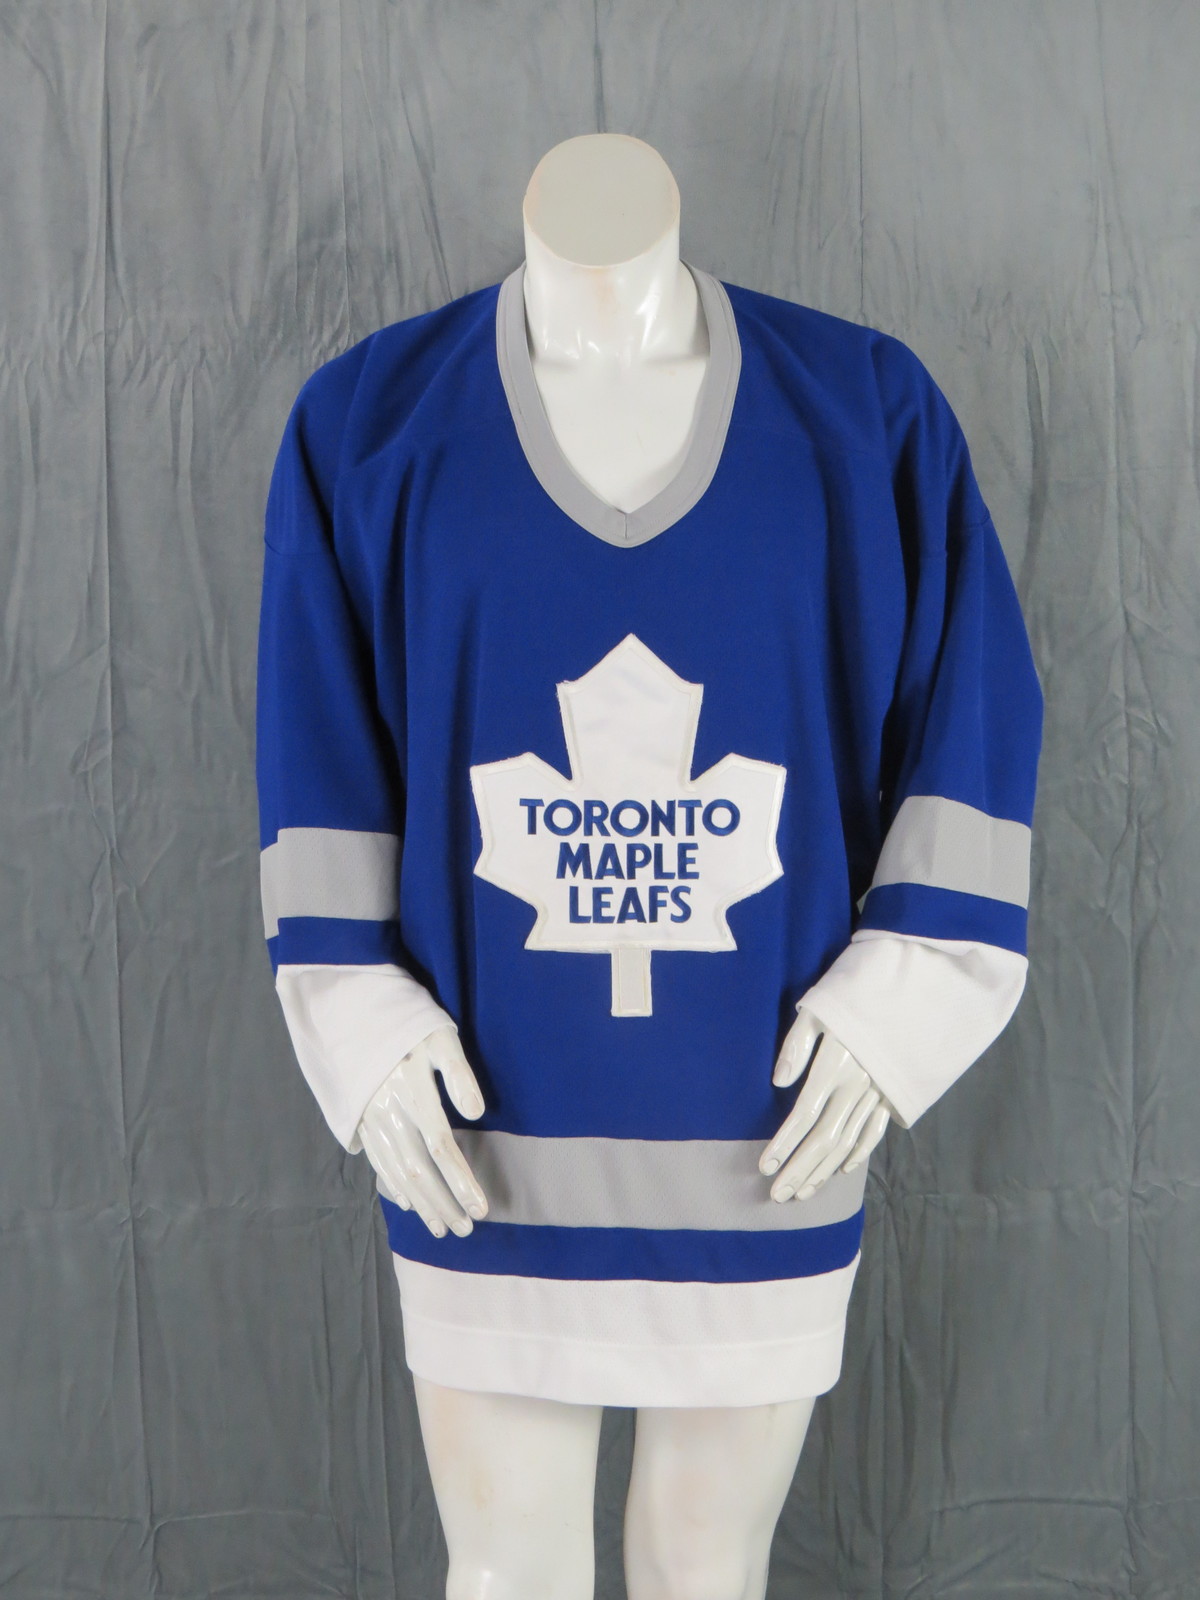 Tornoto Maple Leafs Jersey (Retro) - Early 2000s Away Jersey by CCM - Men's XL - £51.11 GBP